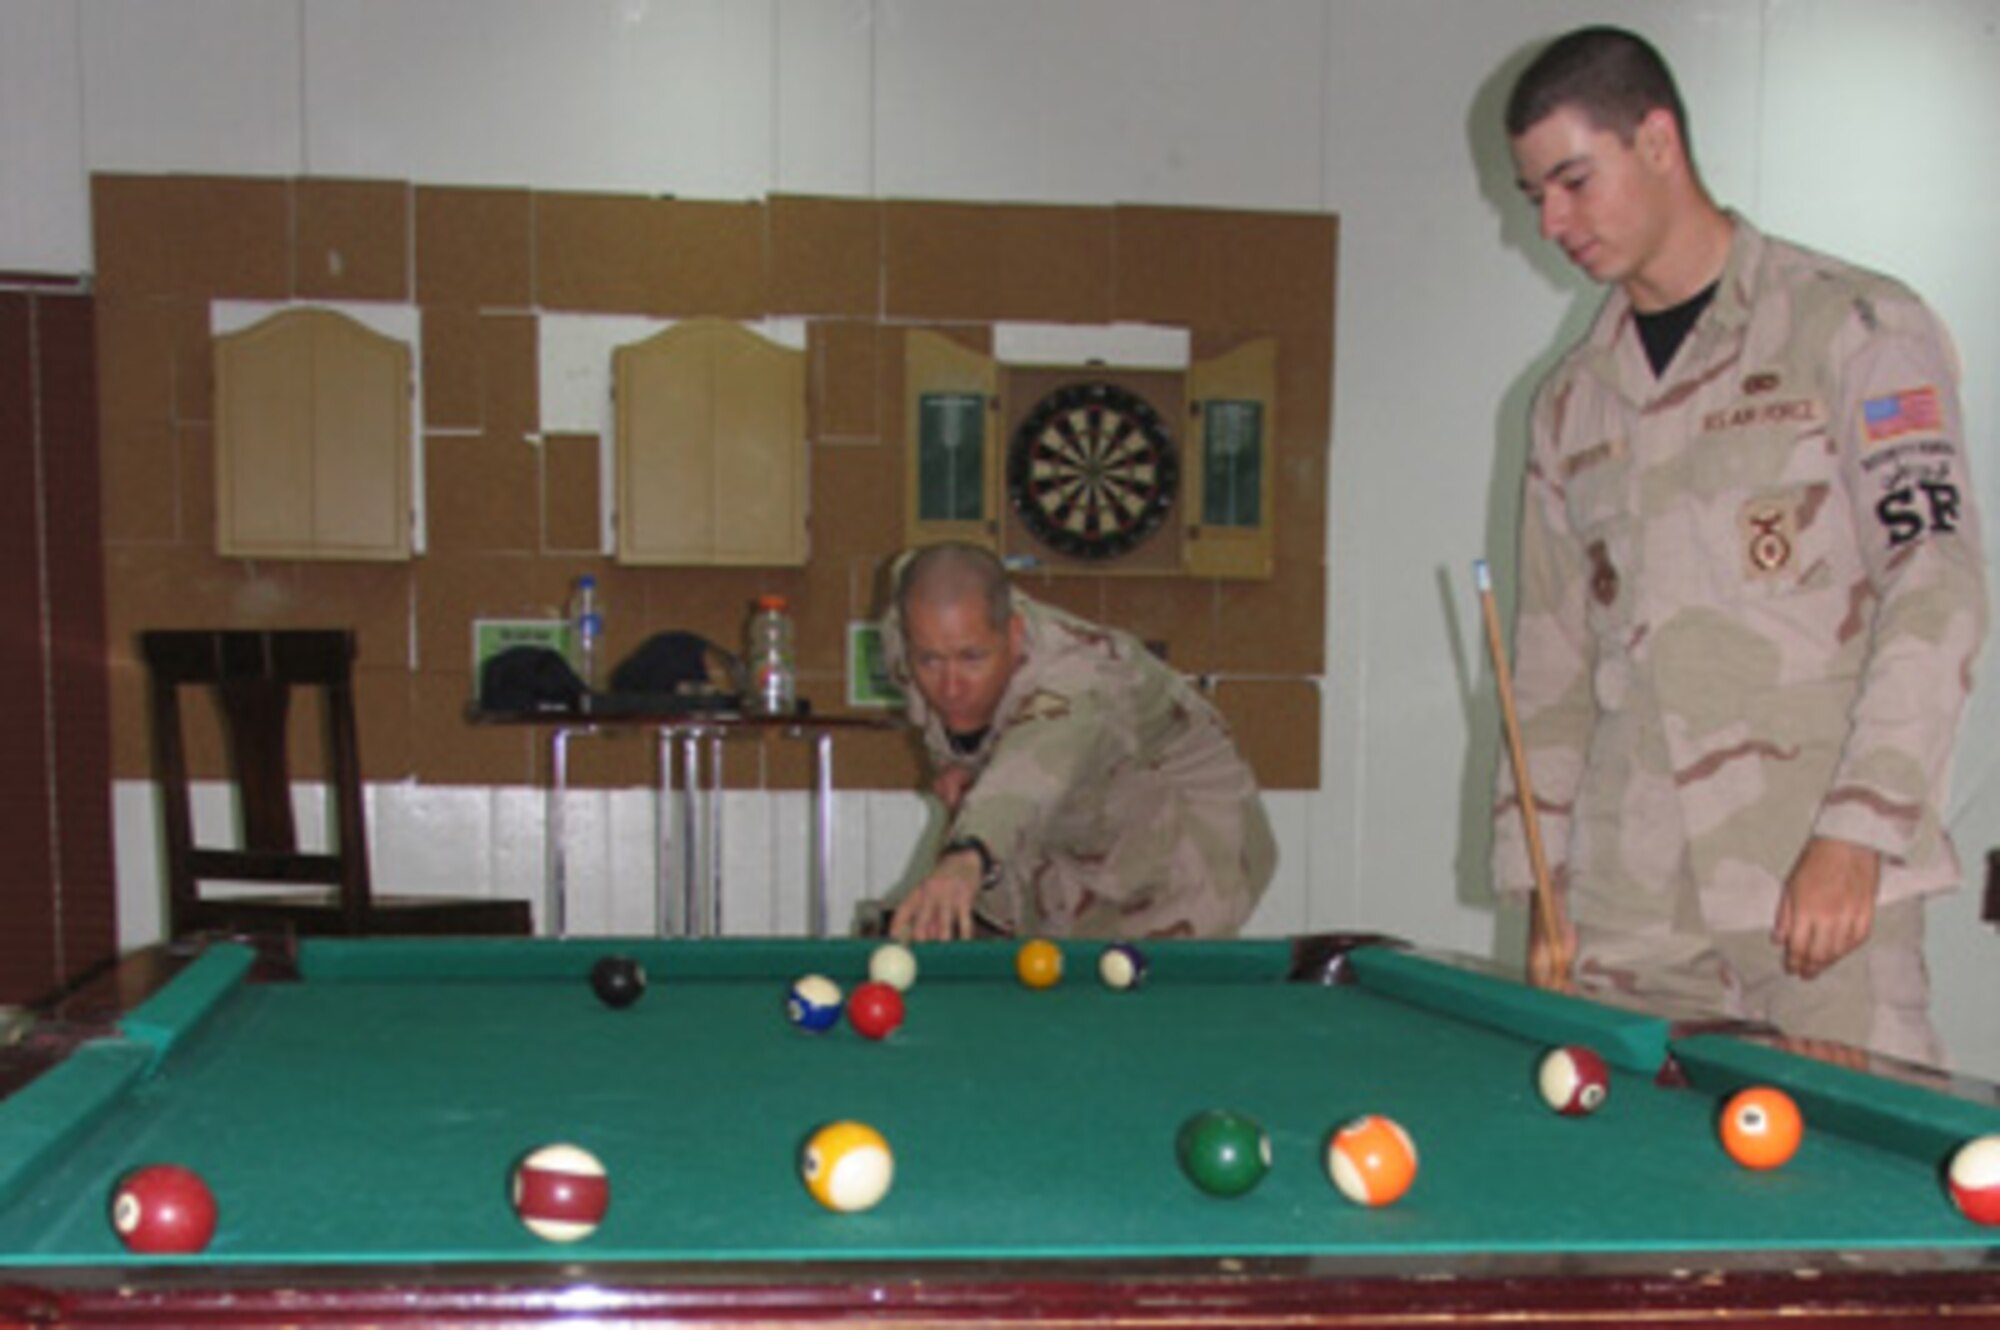 Airman 1st Class Jon Borseth II, looks on as his father, Master Sgt. Jon Borseth, takes his next shot during a game of pool. Sergeant and Airman Borseth take every opportunity to spend quality time together during their deployment to the 386th Air Expeditionary Wing. (Air Force photo by Capt. Shilo Weir) 

